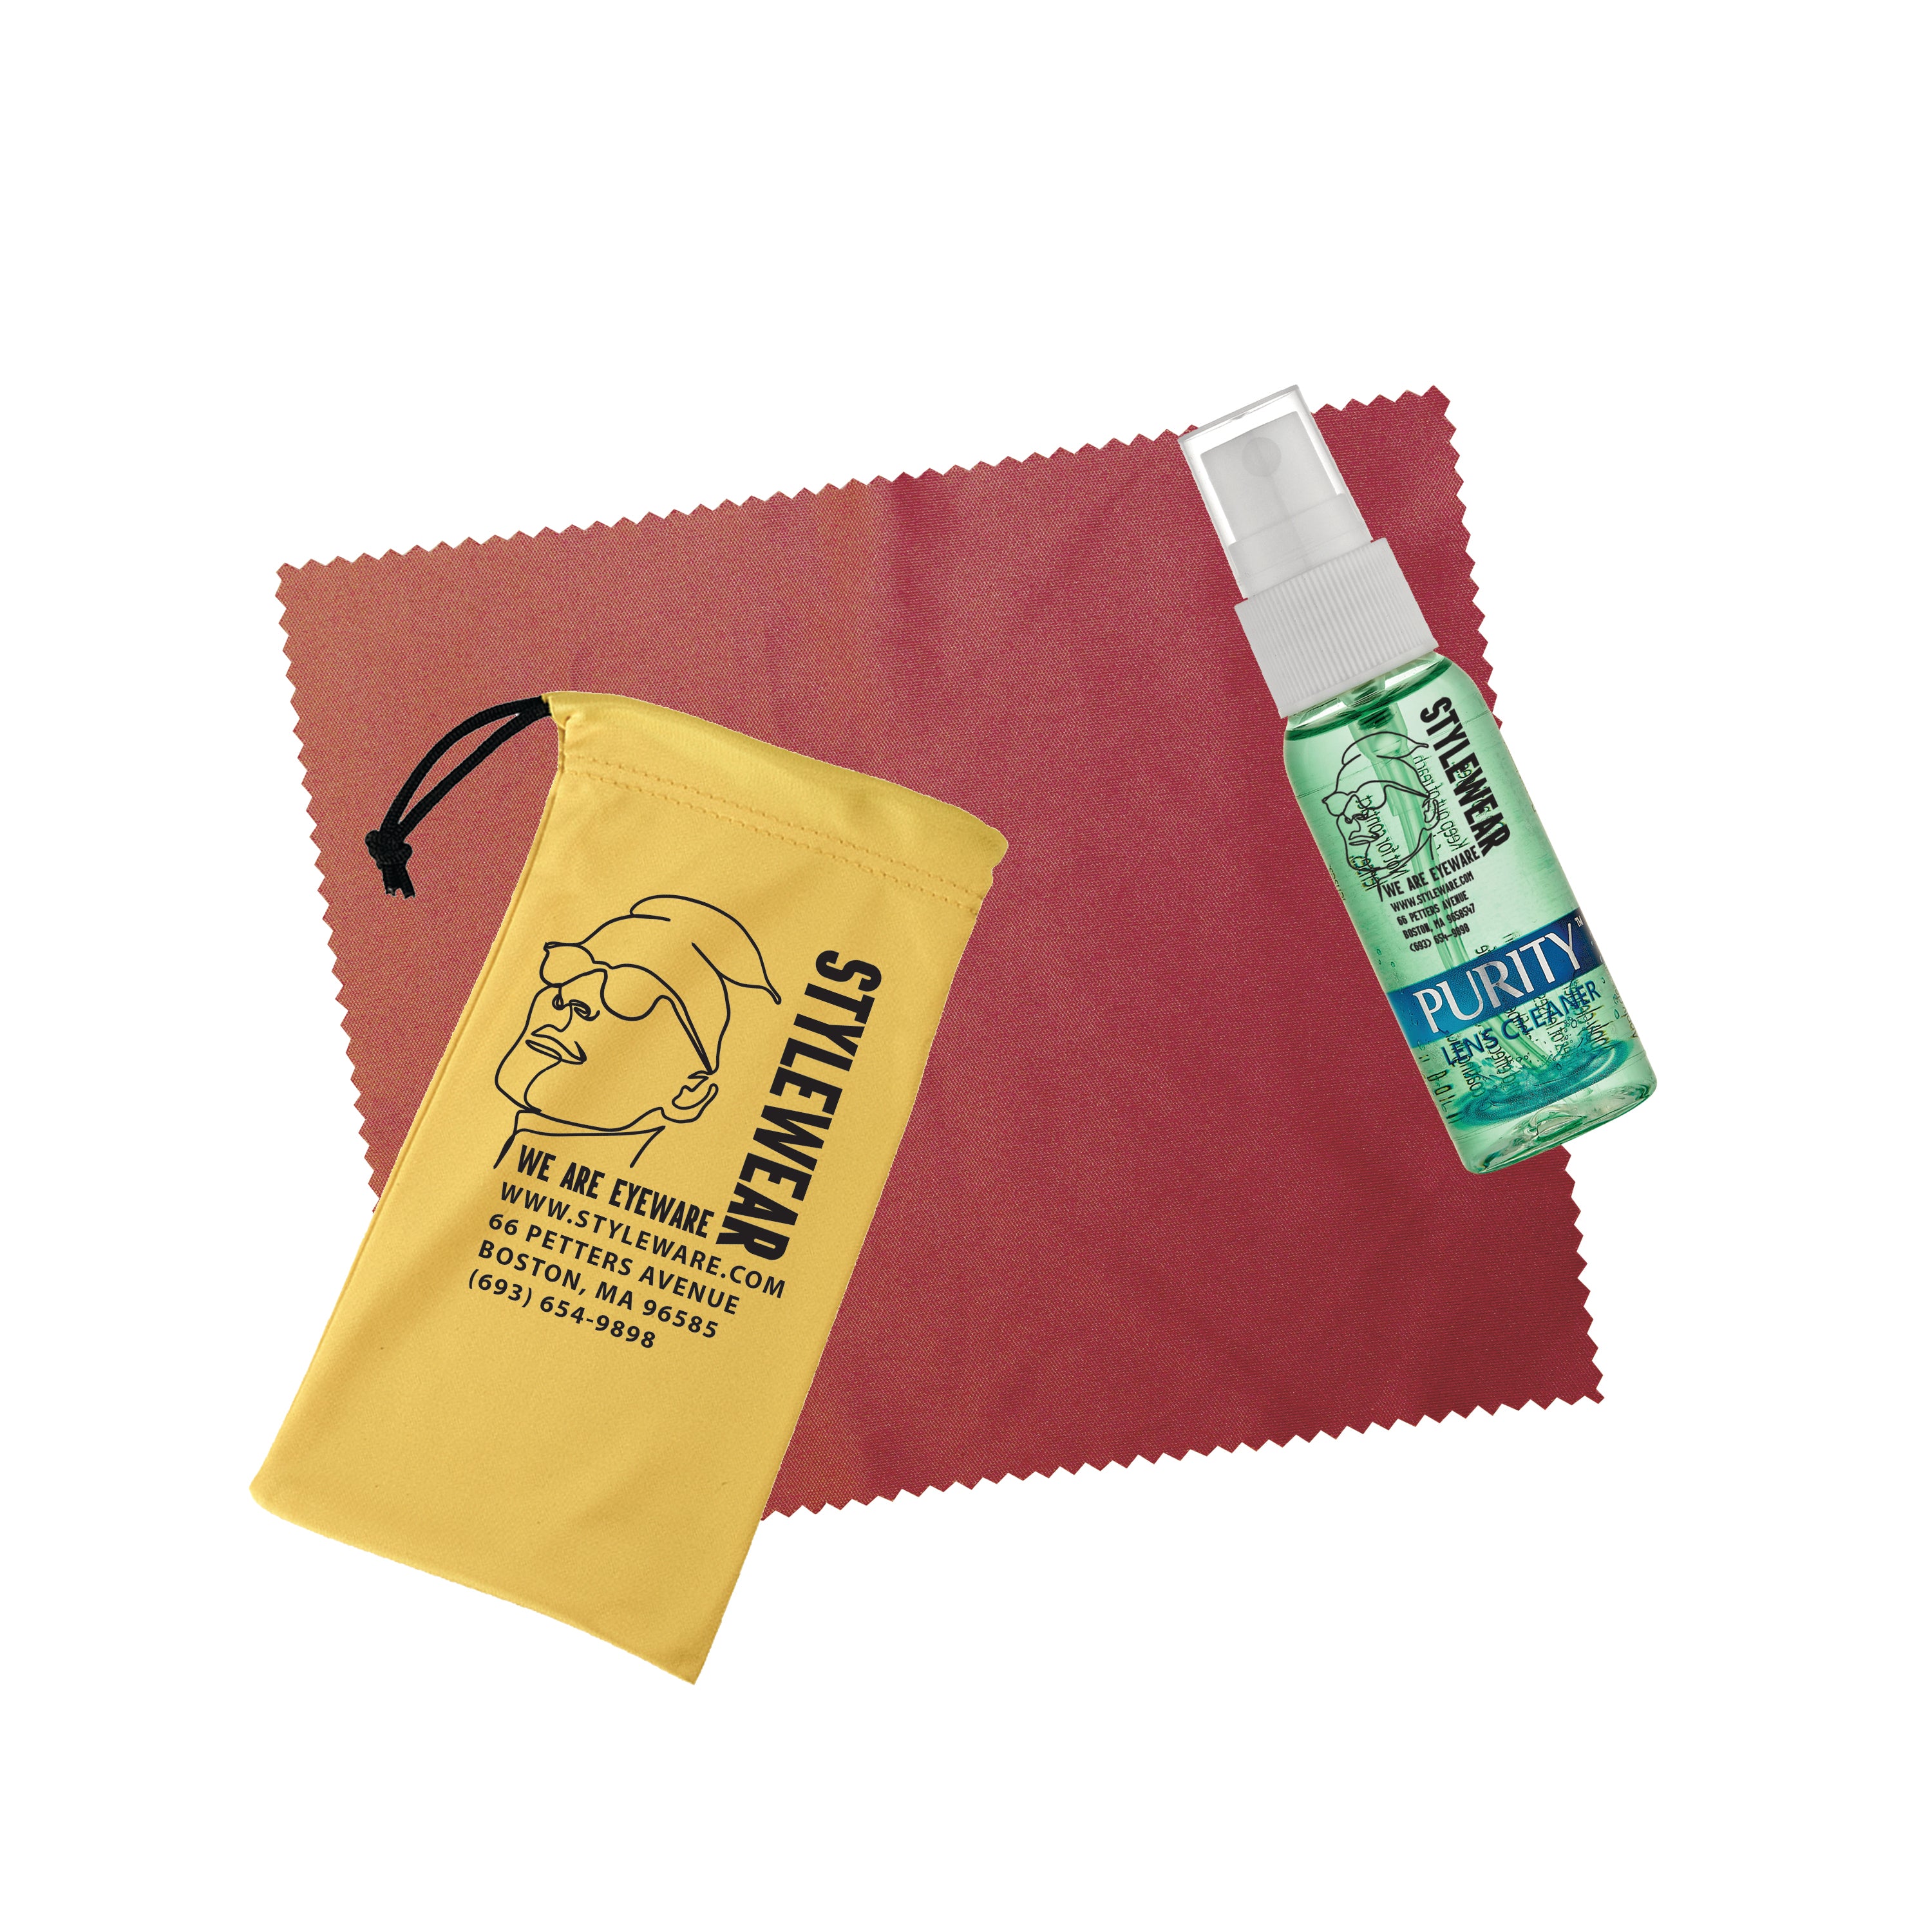 2 oz. Purity™ Imprinted Pouch Kits